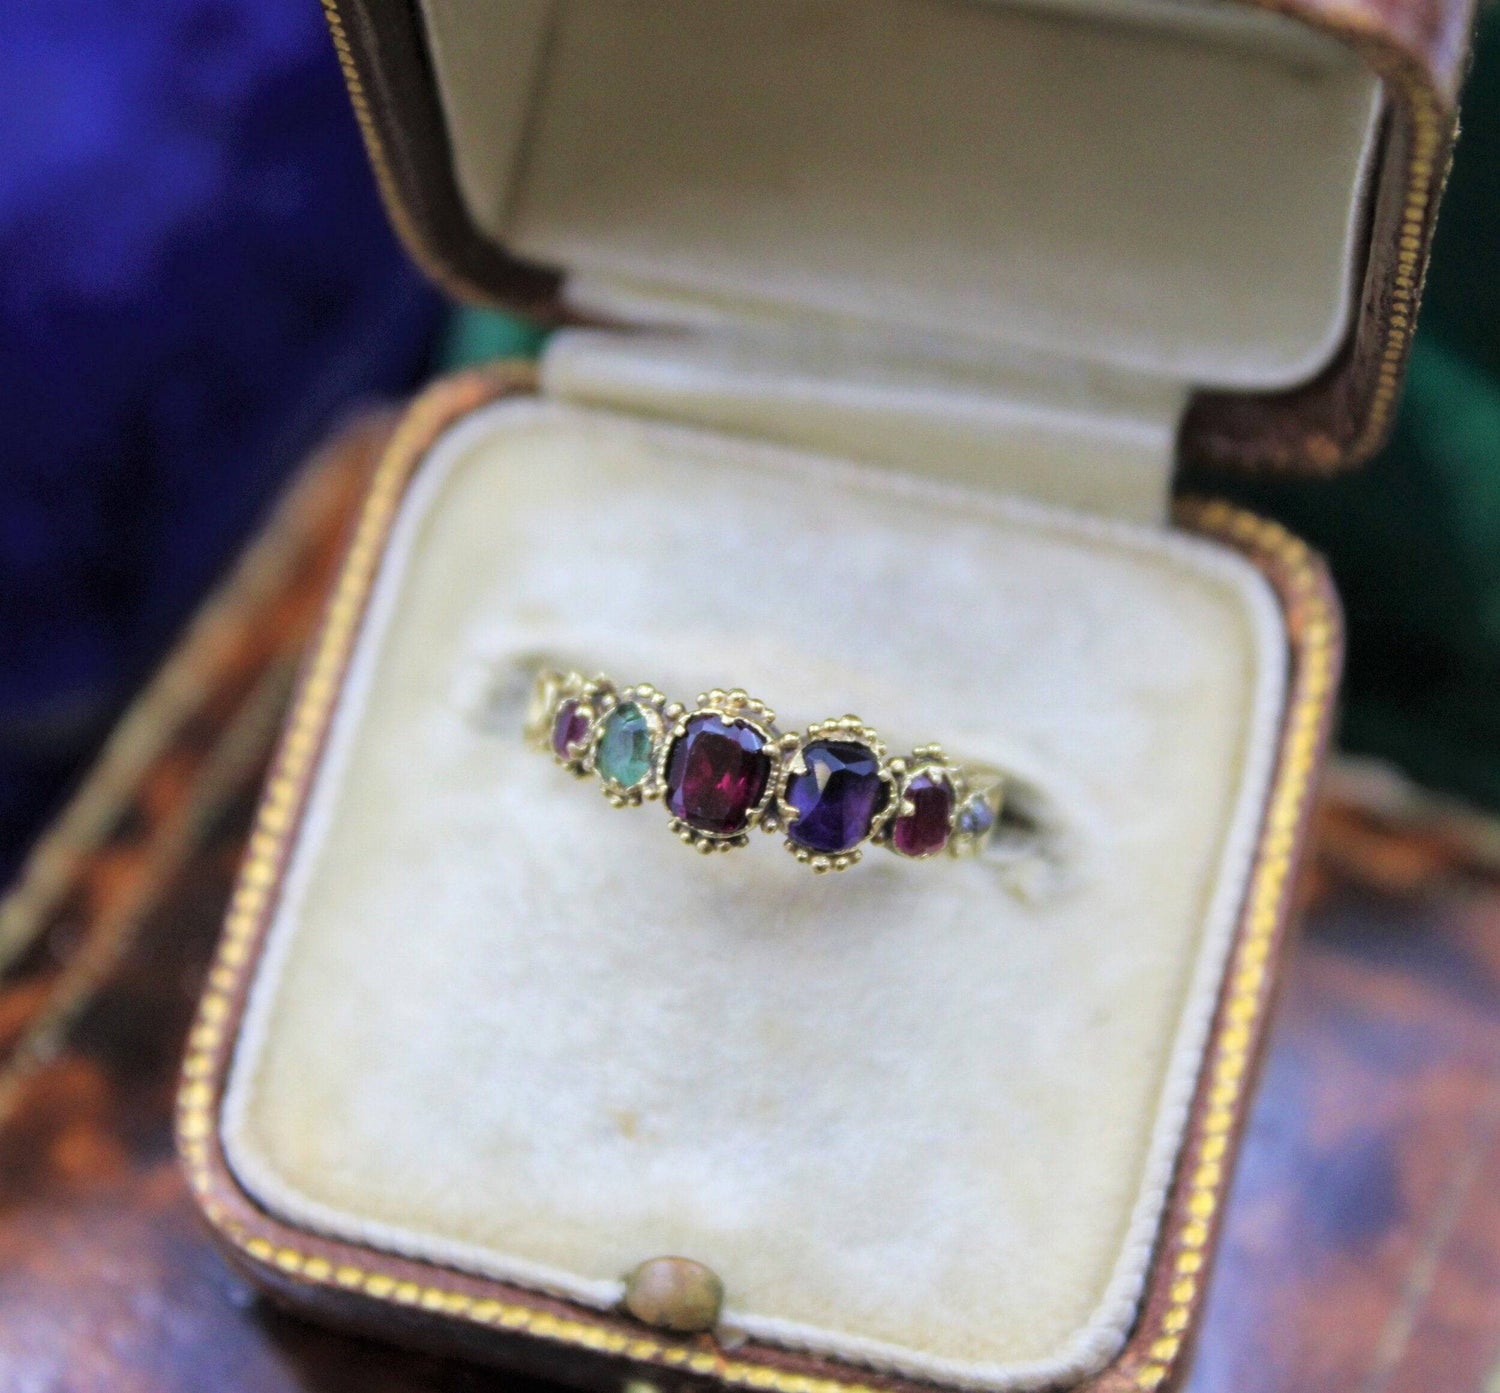 A very fine example of an early Victorian Gem set "Regard" Ring set in High Carat Yellow Gold, English, Circa 1850 - Robin Haydock Antiques